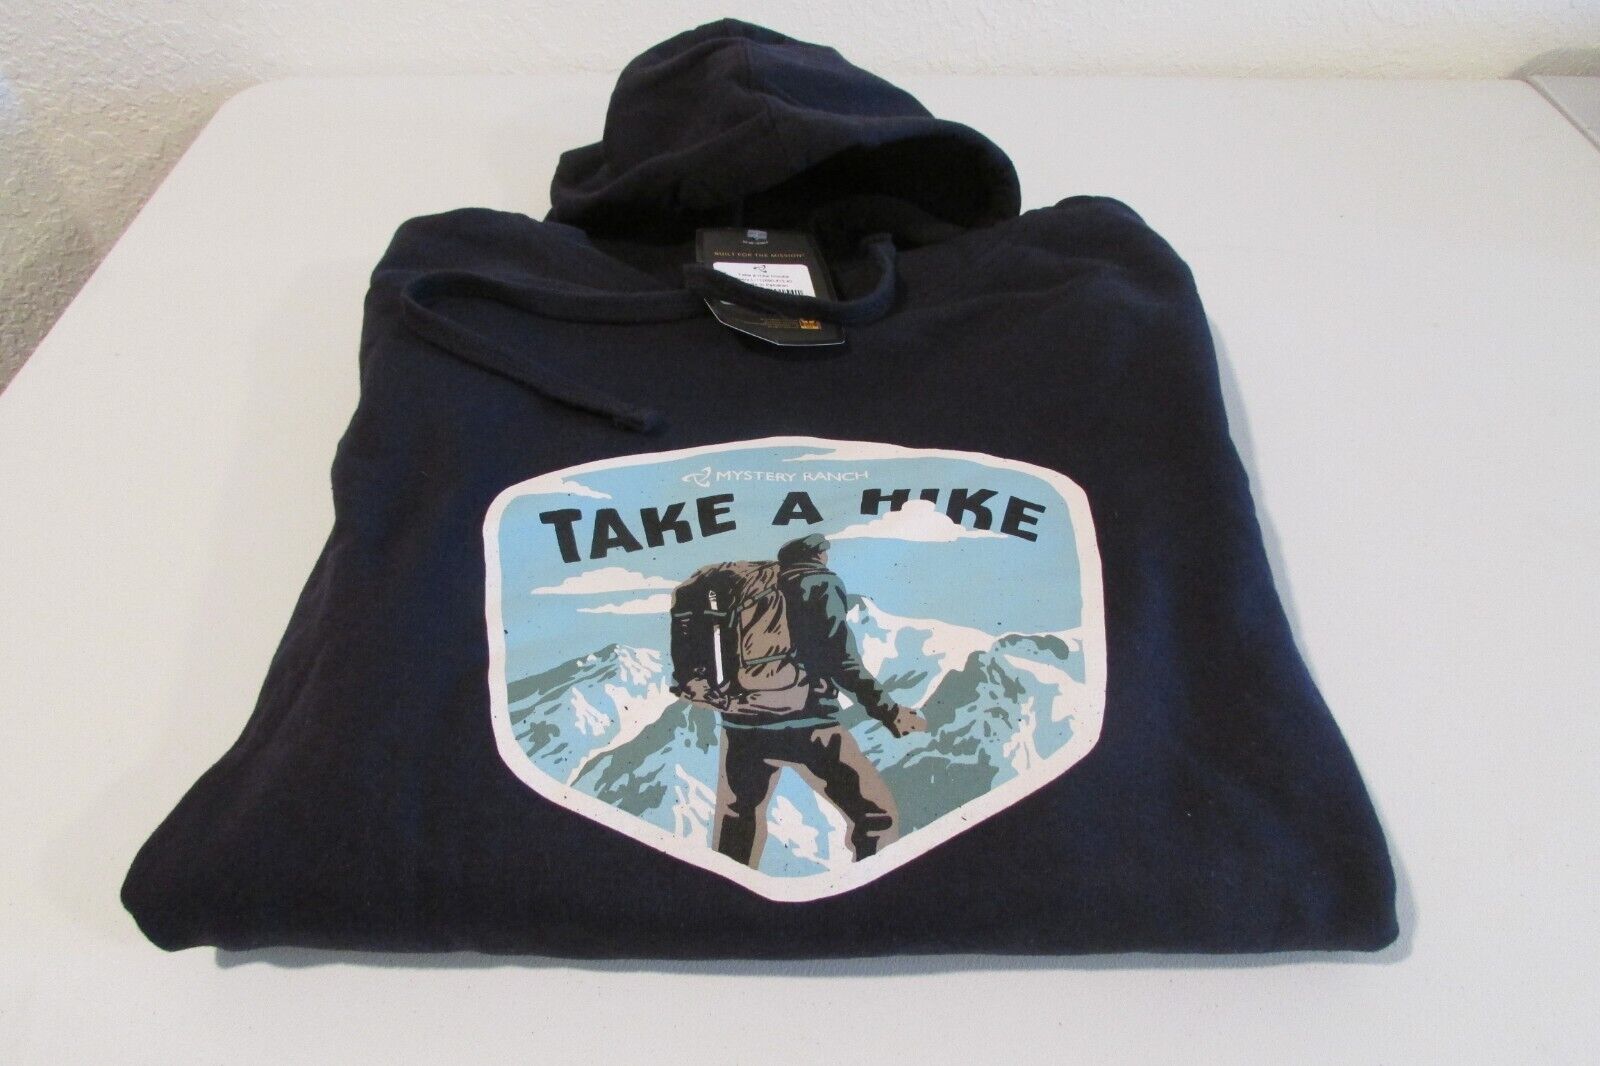 Mystery Ranch Take A Hike Hooded Sweatshirt, Large, Navy Blue New with Tags